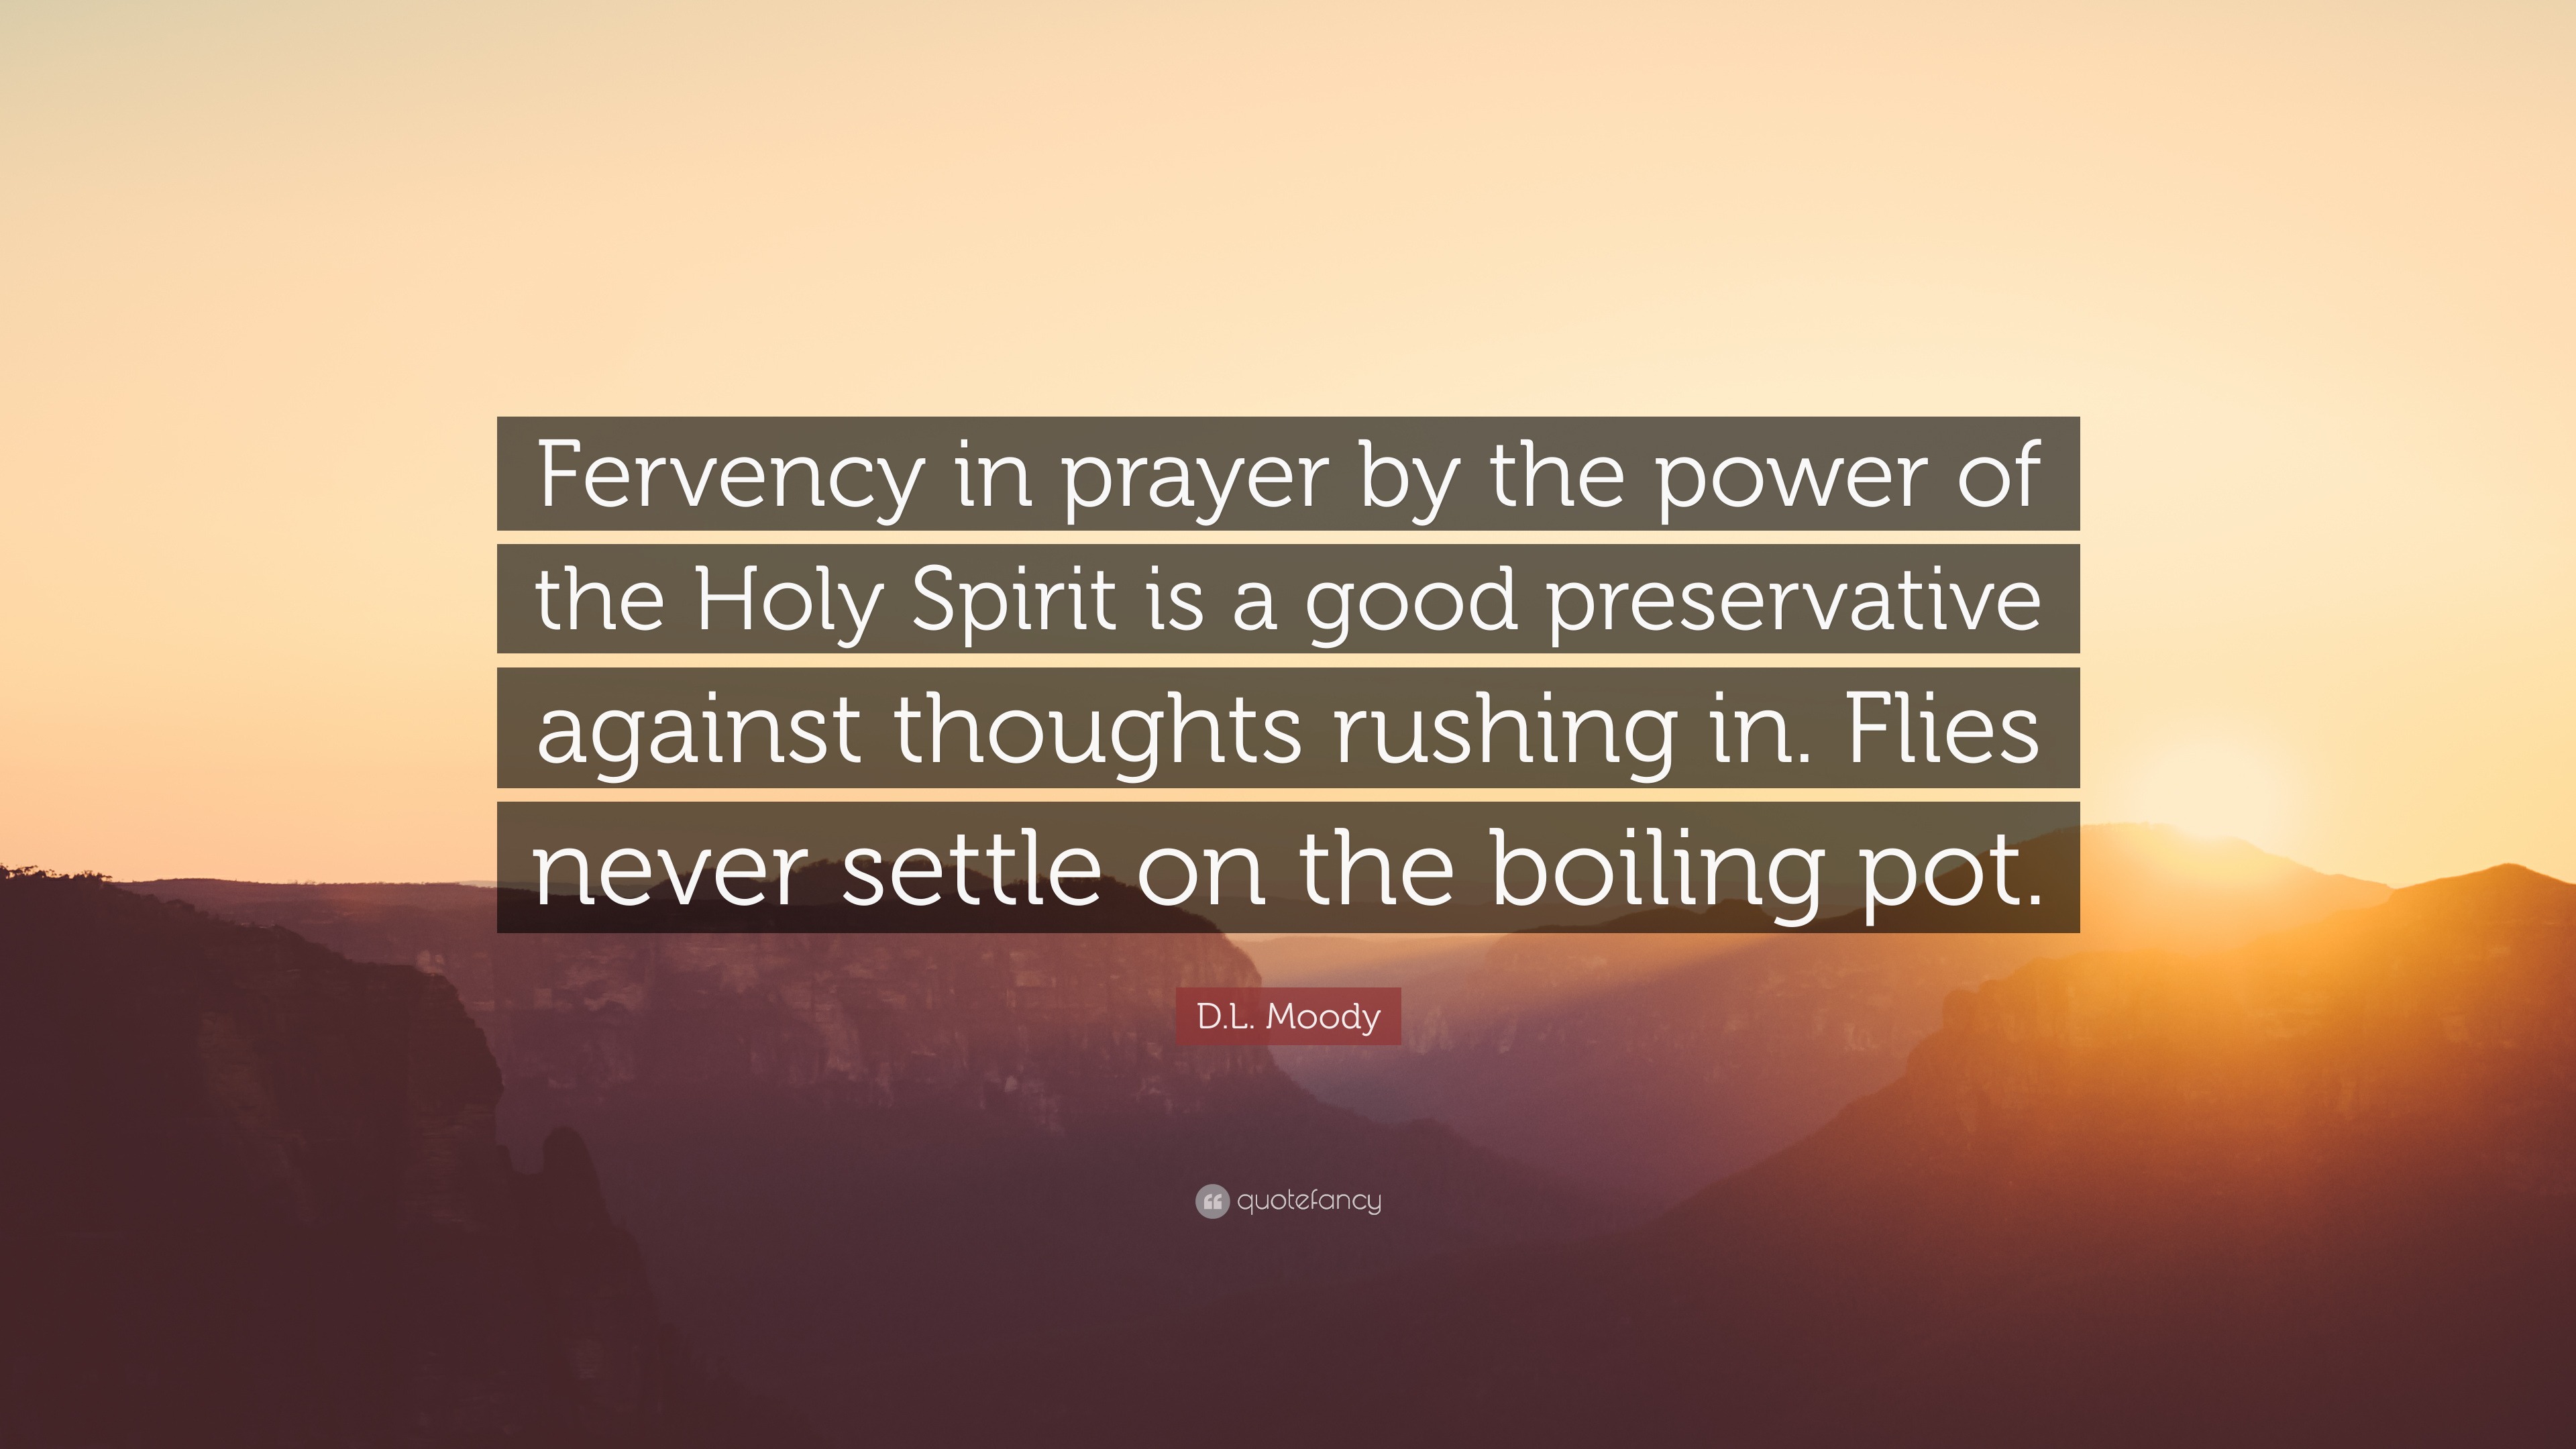 D.L. Moody Quote: “Fervency in prayer by the power of the Holy Spirit ...